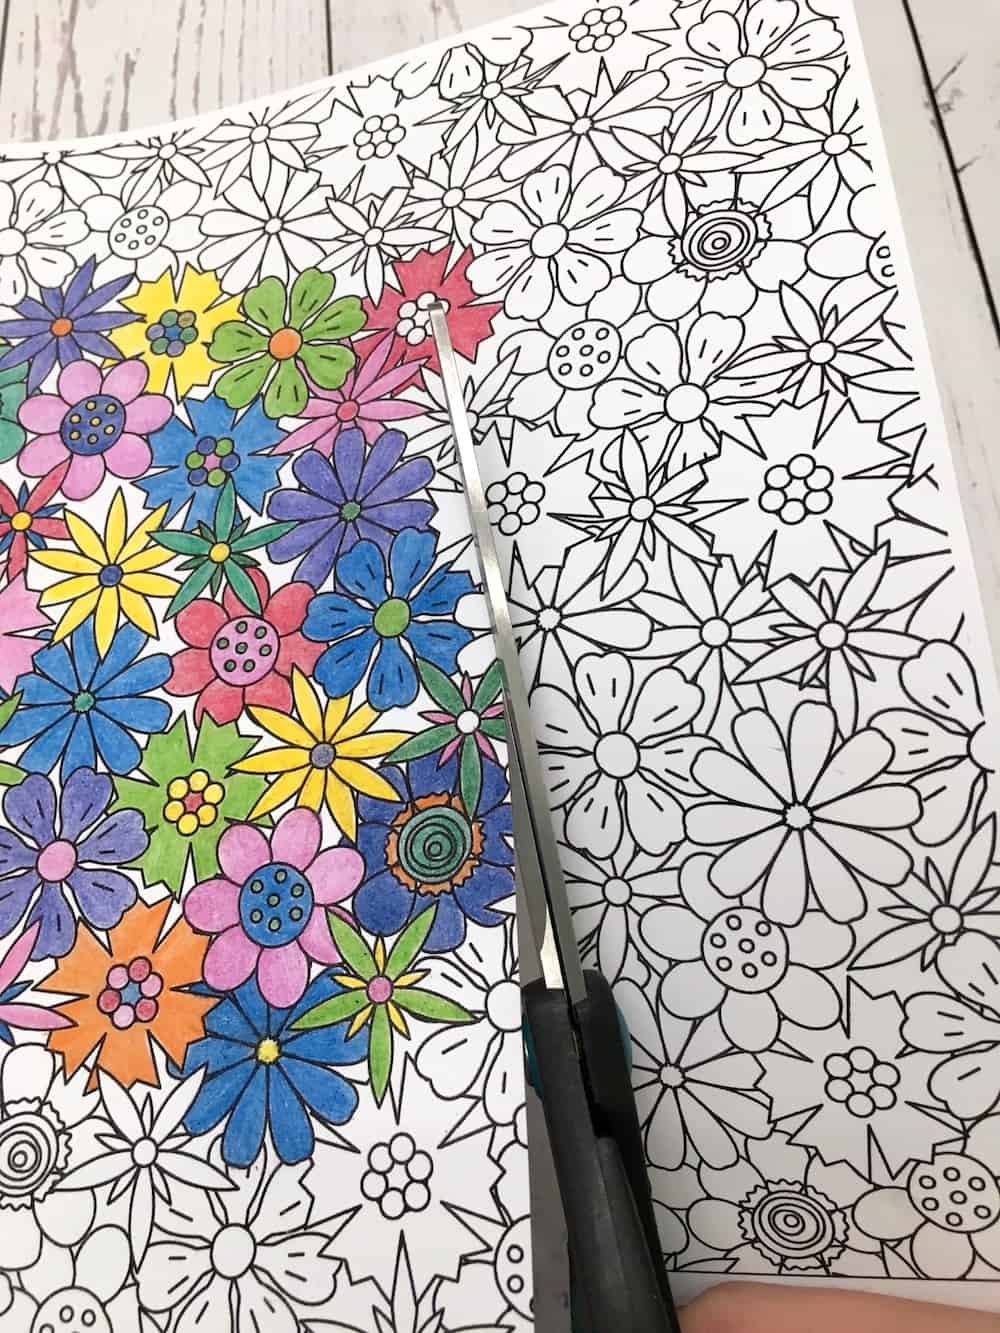 Cutting out the coloring page with scissors